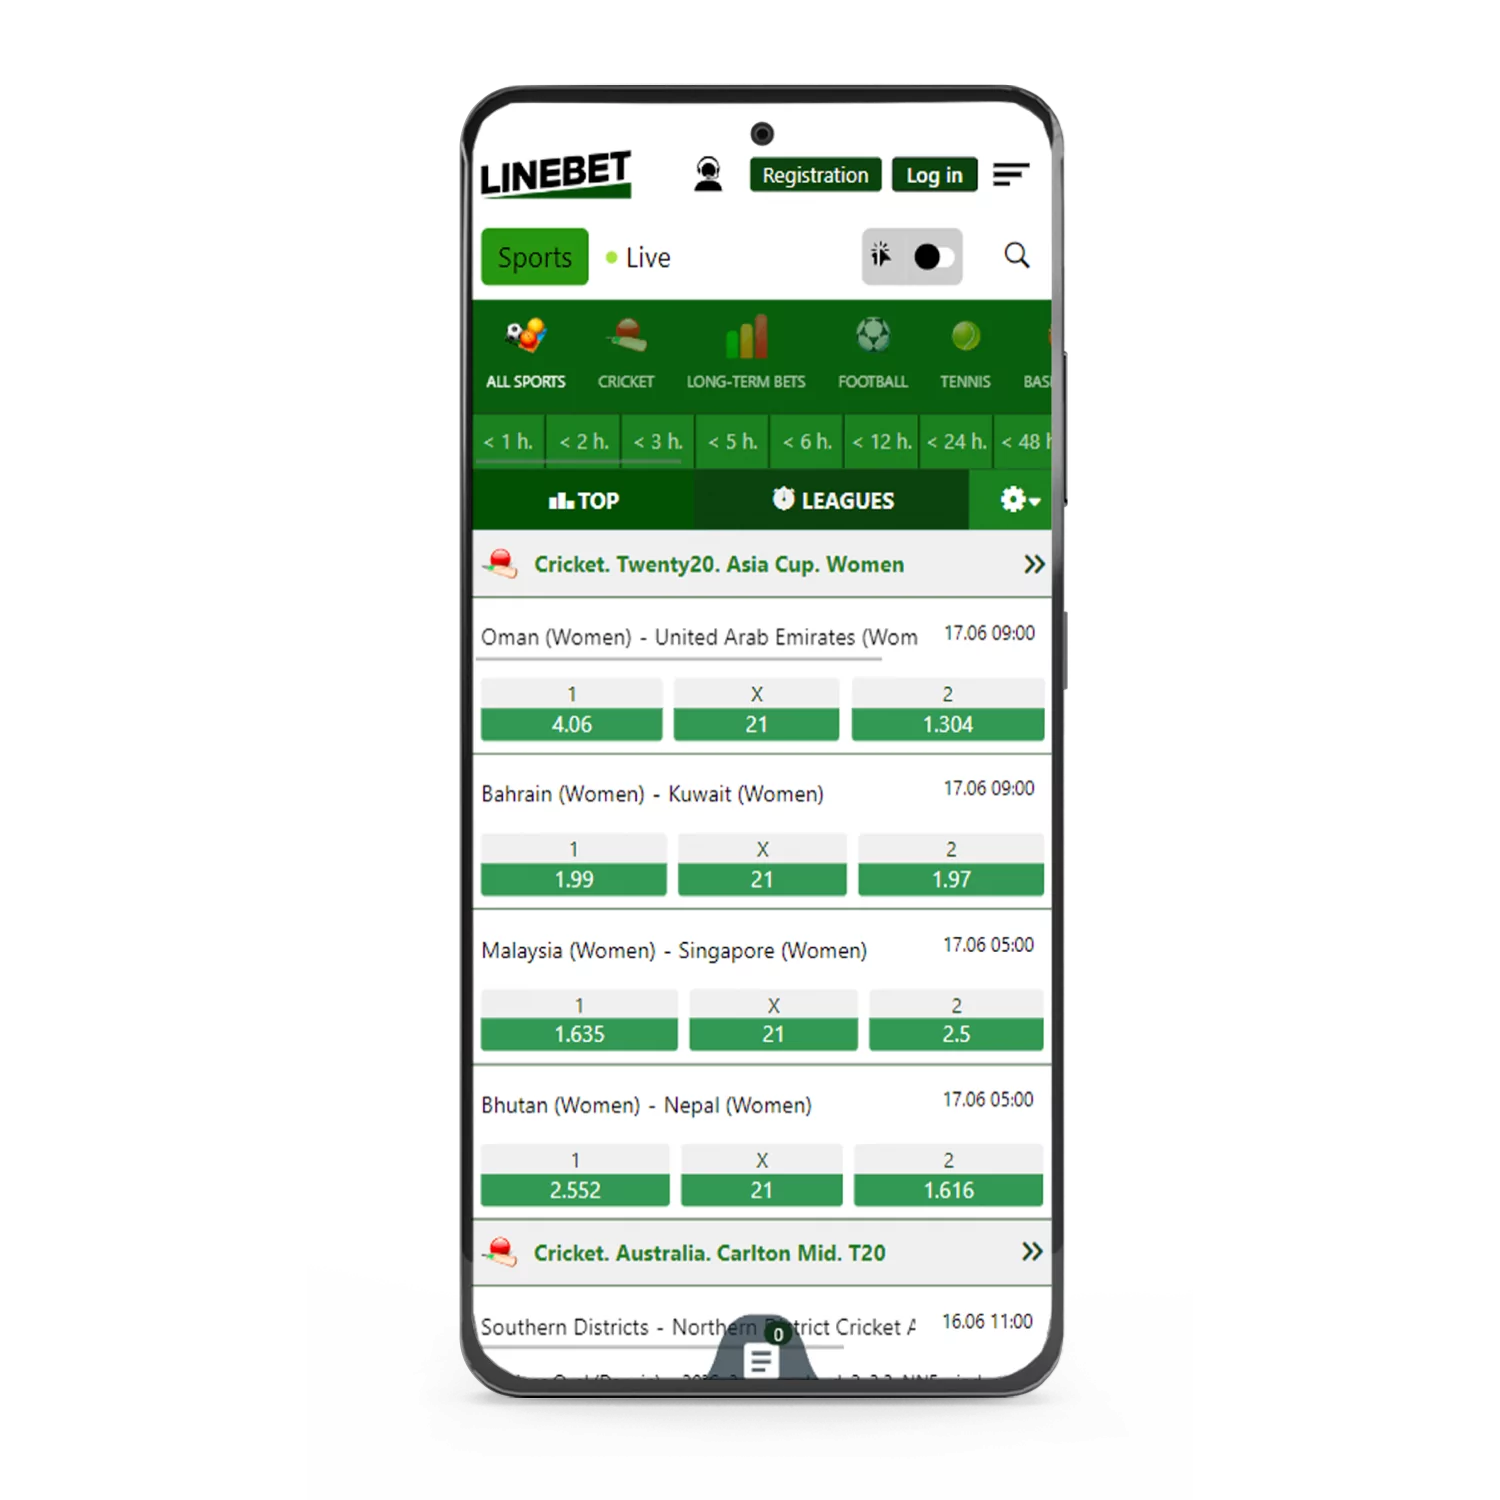 The Linebet app can be downloaded for free for cricket betting from the site.